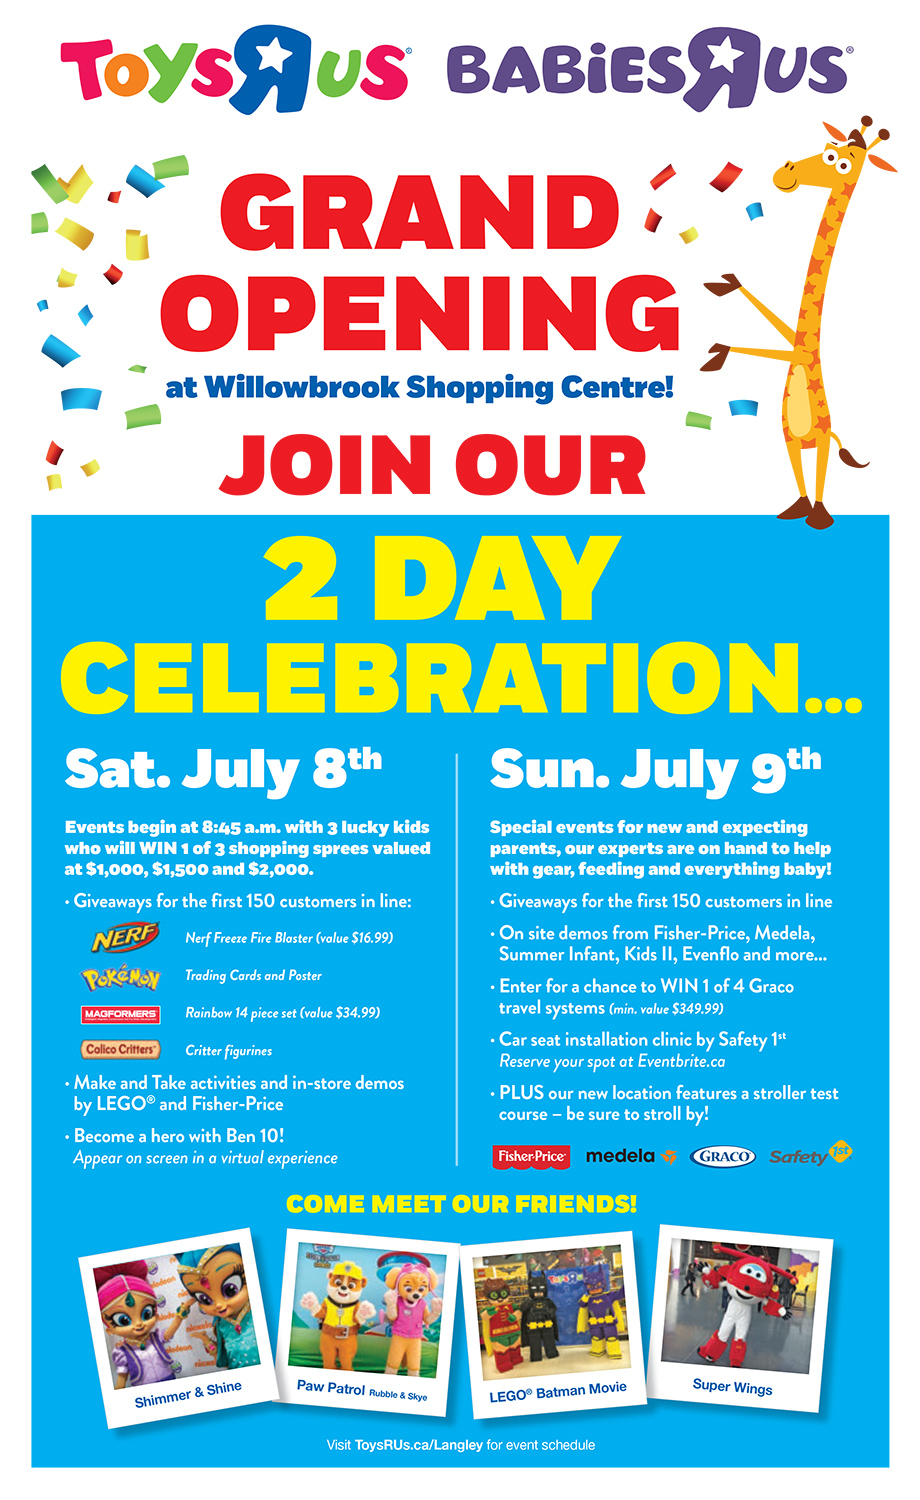 Toys 'R' Us returns with grand opening event this weekend